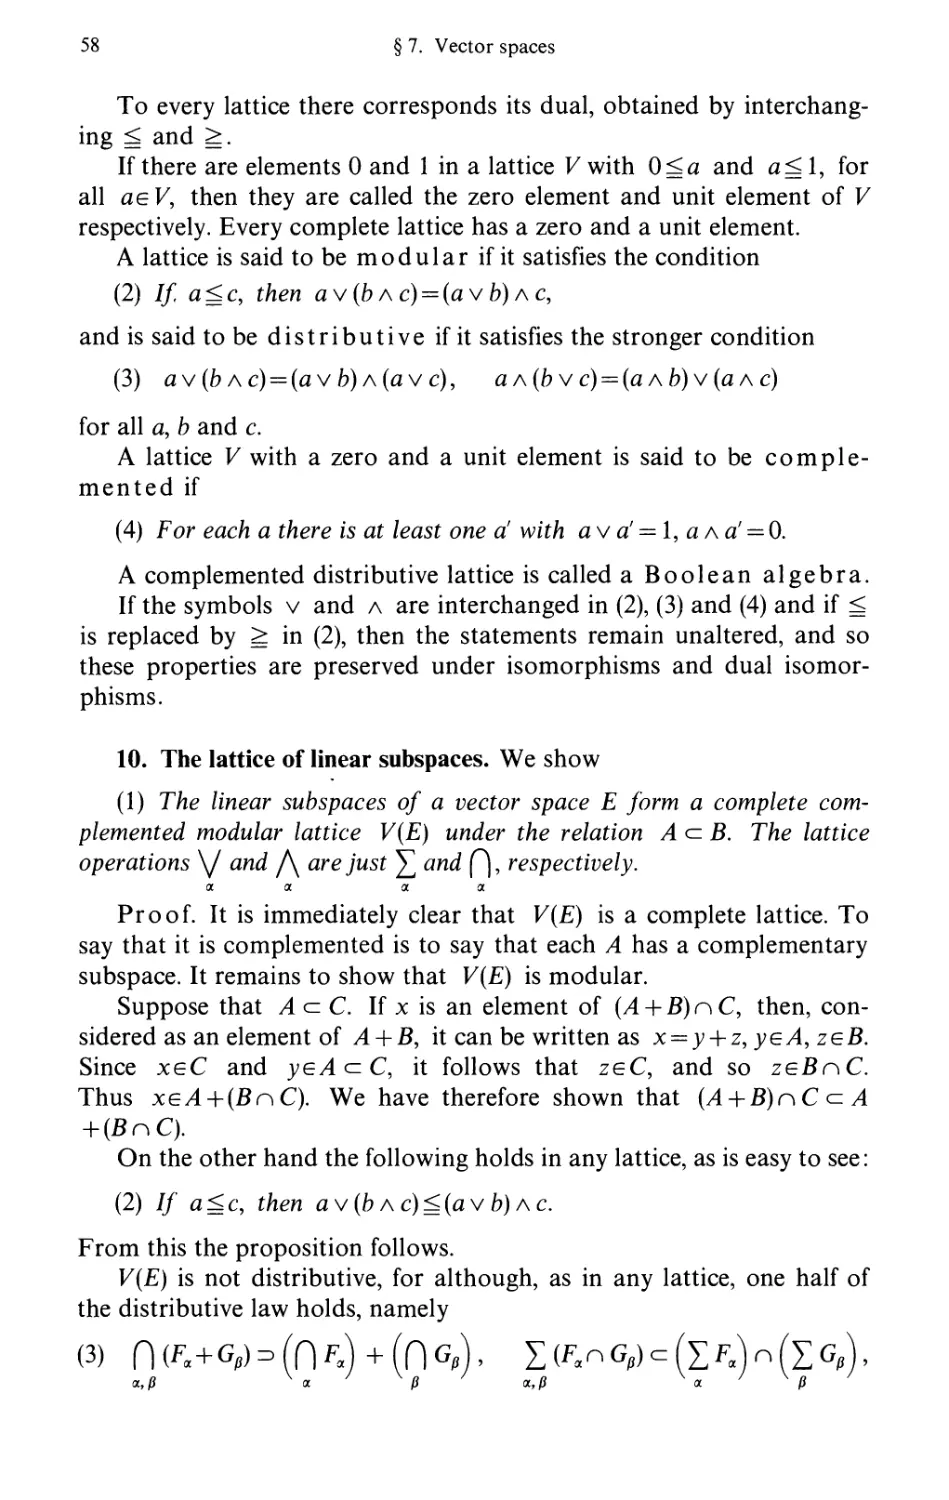 10. The lattice of linear subspaces